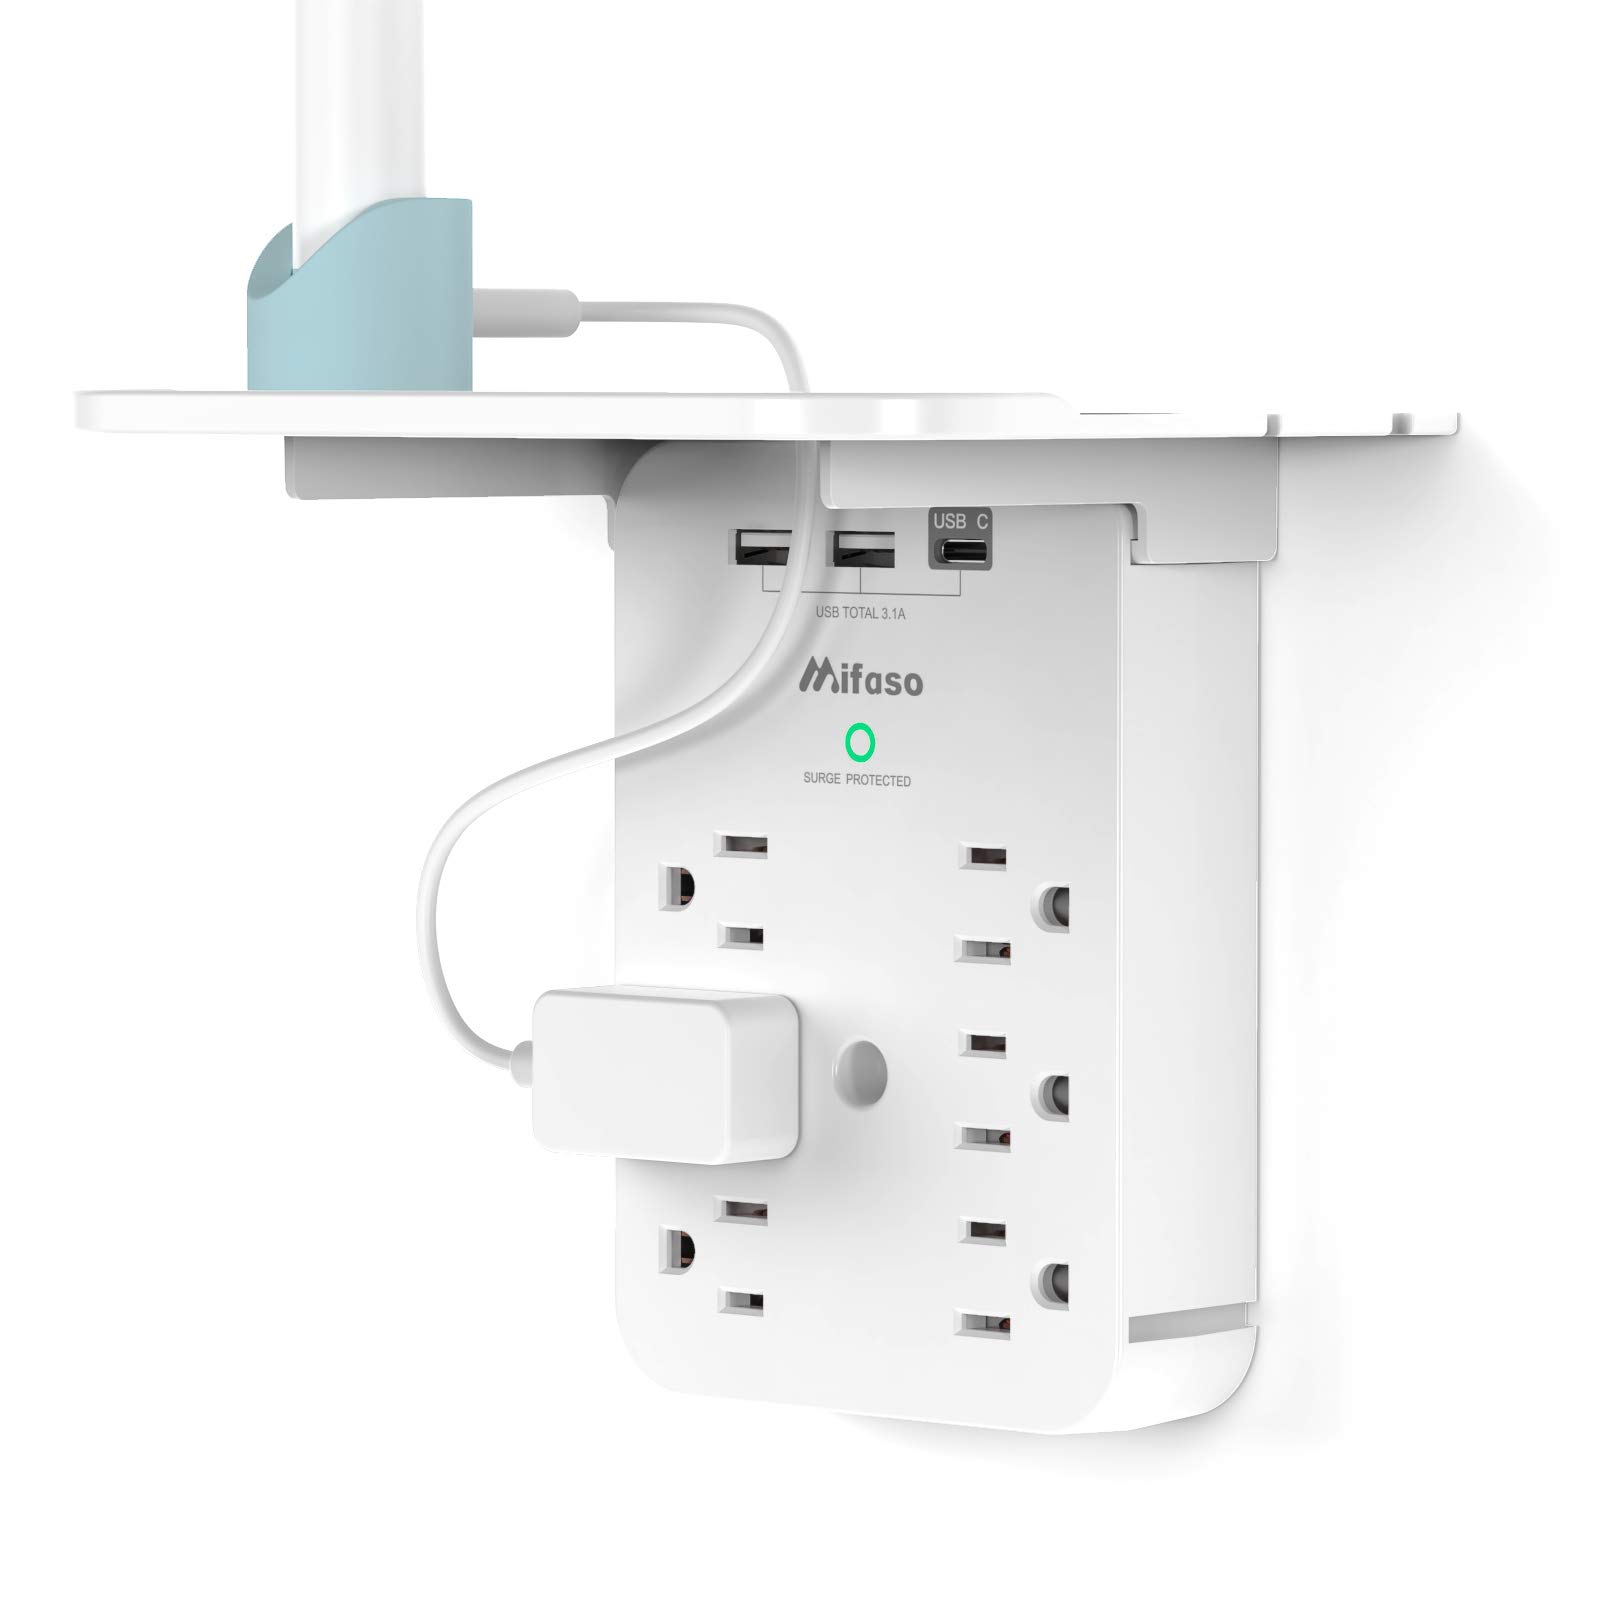 Wall Outlet Extender - Surge Protector 6 AC Outlets Multi Plug Outlet, 2 USB and USB C Charging Ports Wall Plug Expander, USB Wall Charger Outlet Splitter $19.99 - $11.04